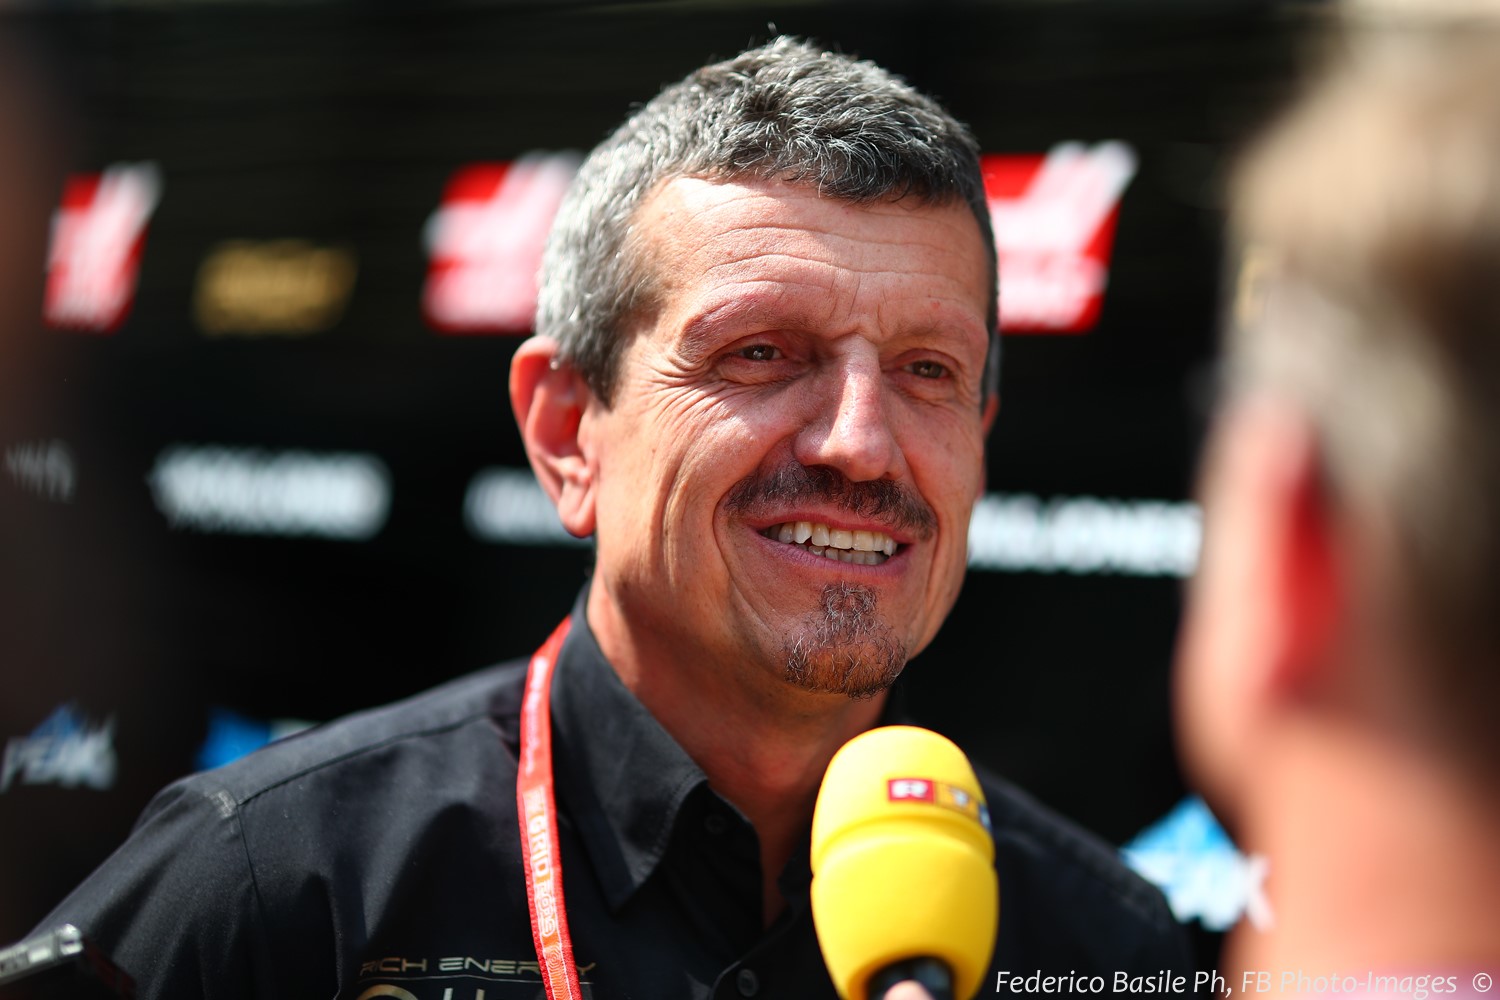 Steiner in Monza Thursday, will soon find out his #1 pick, Hulkenberg, is not going to join his sorry team